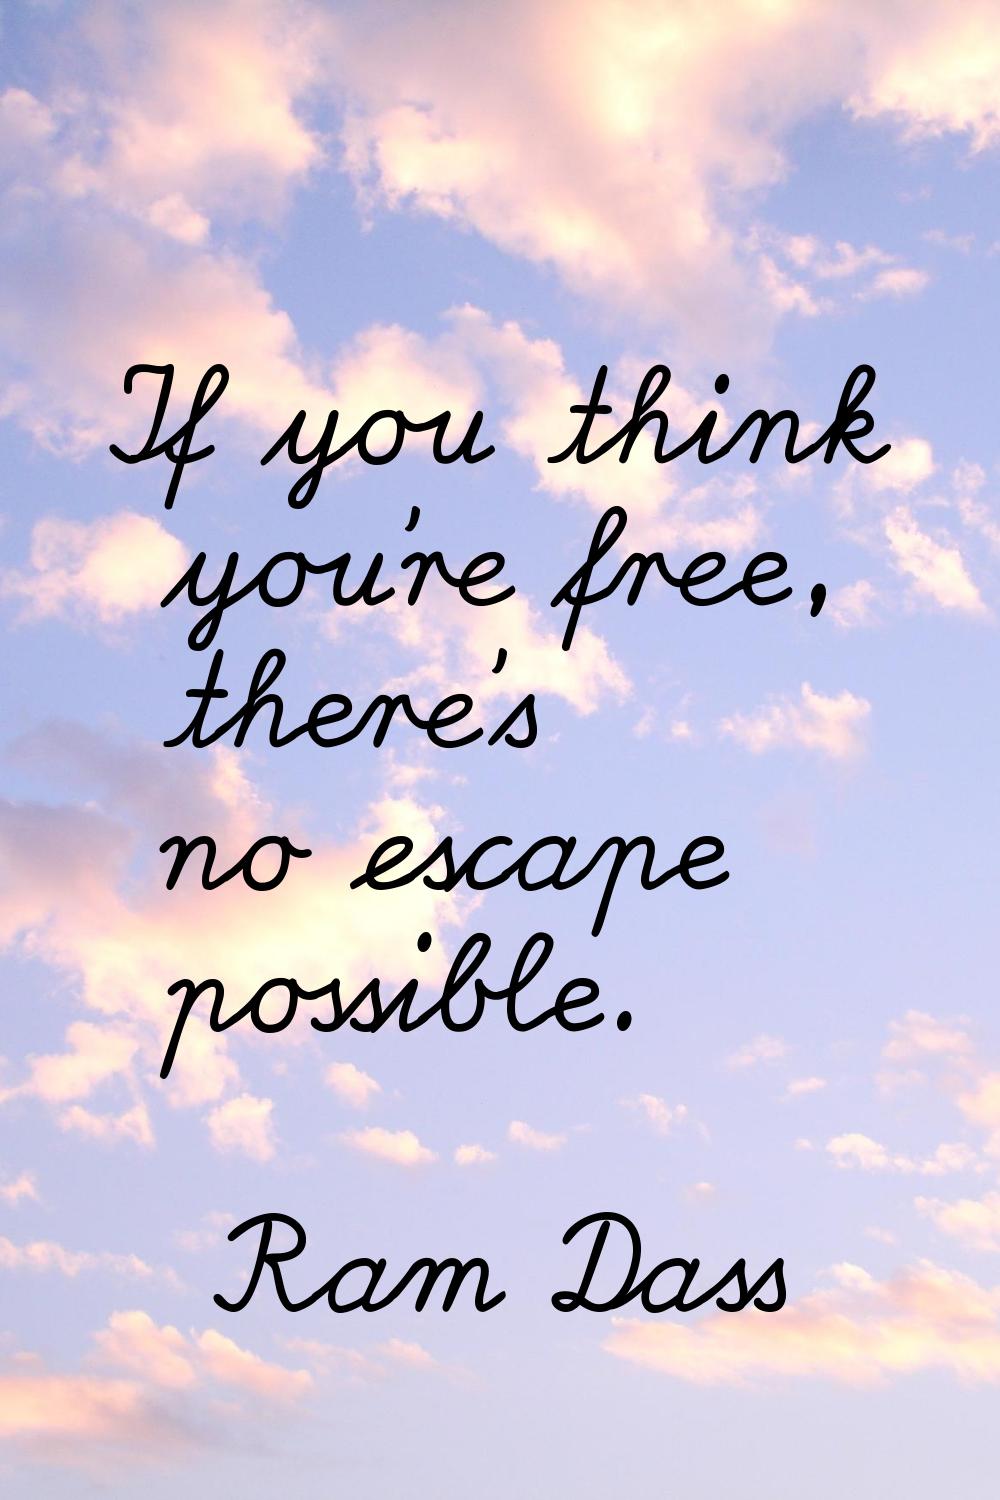 If you think you're free, there's no escape possible.